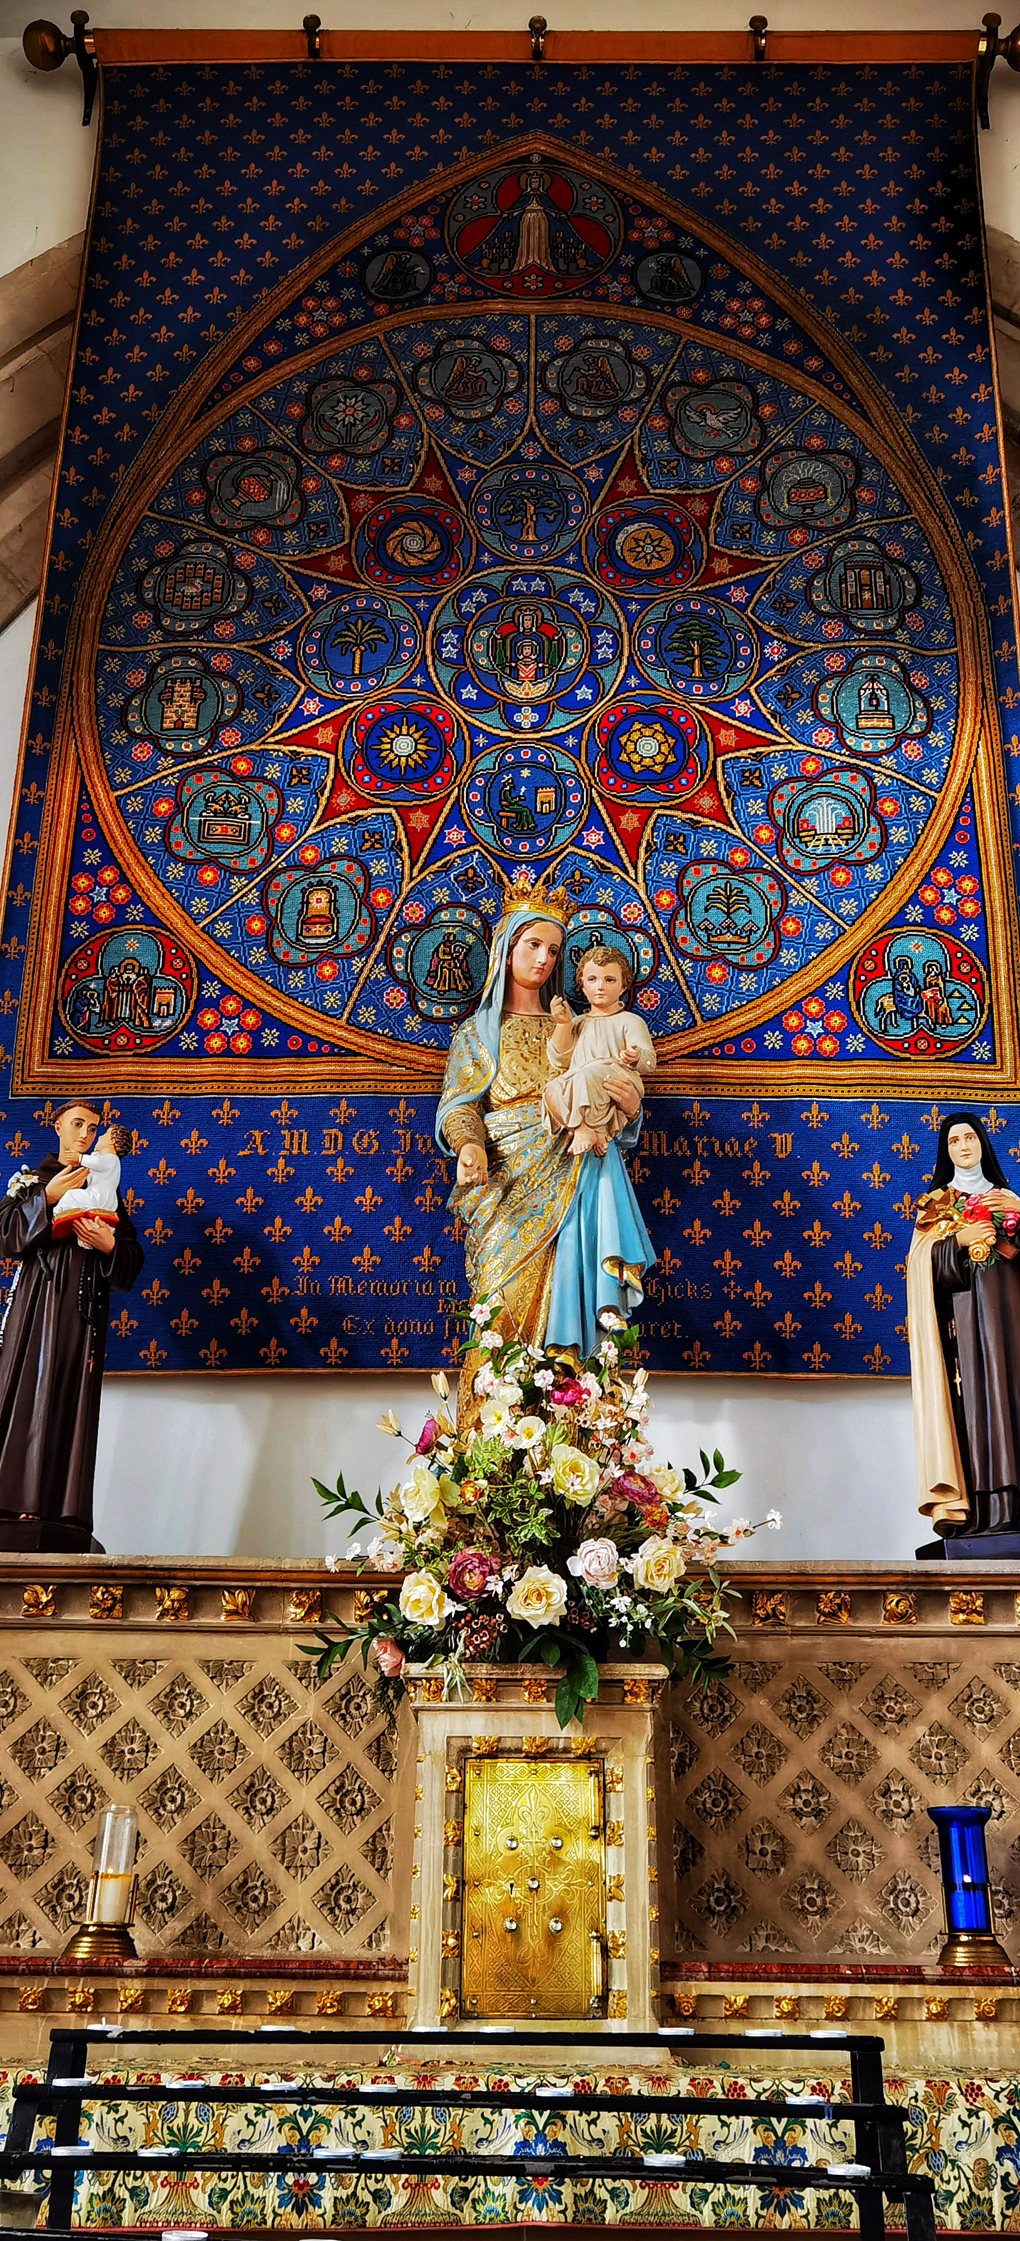 Tapestry dedicated to Saint Mary with statues